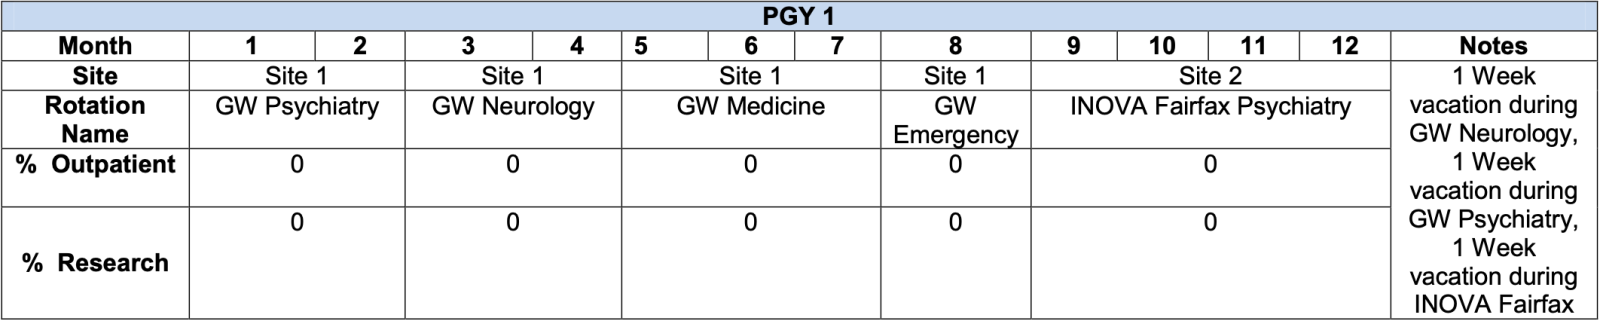 PGY1 schedule